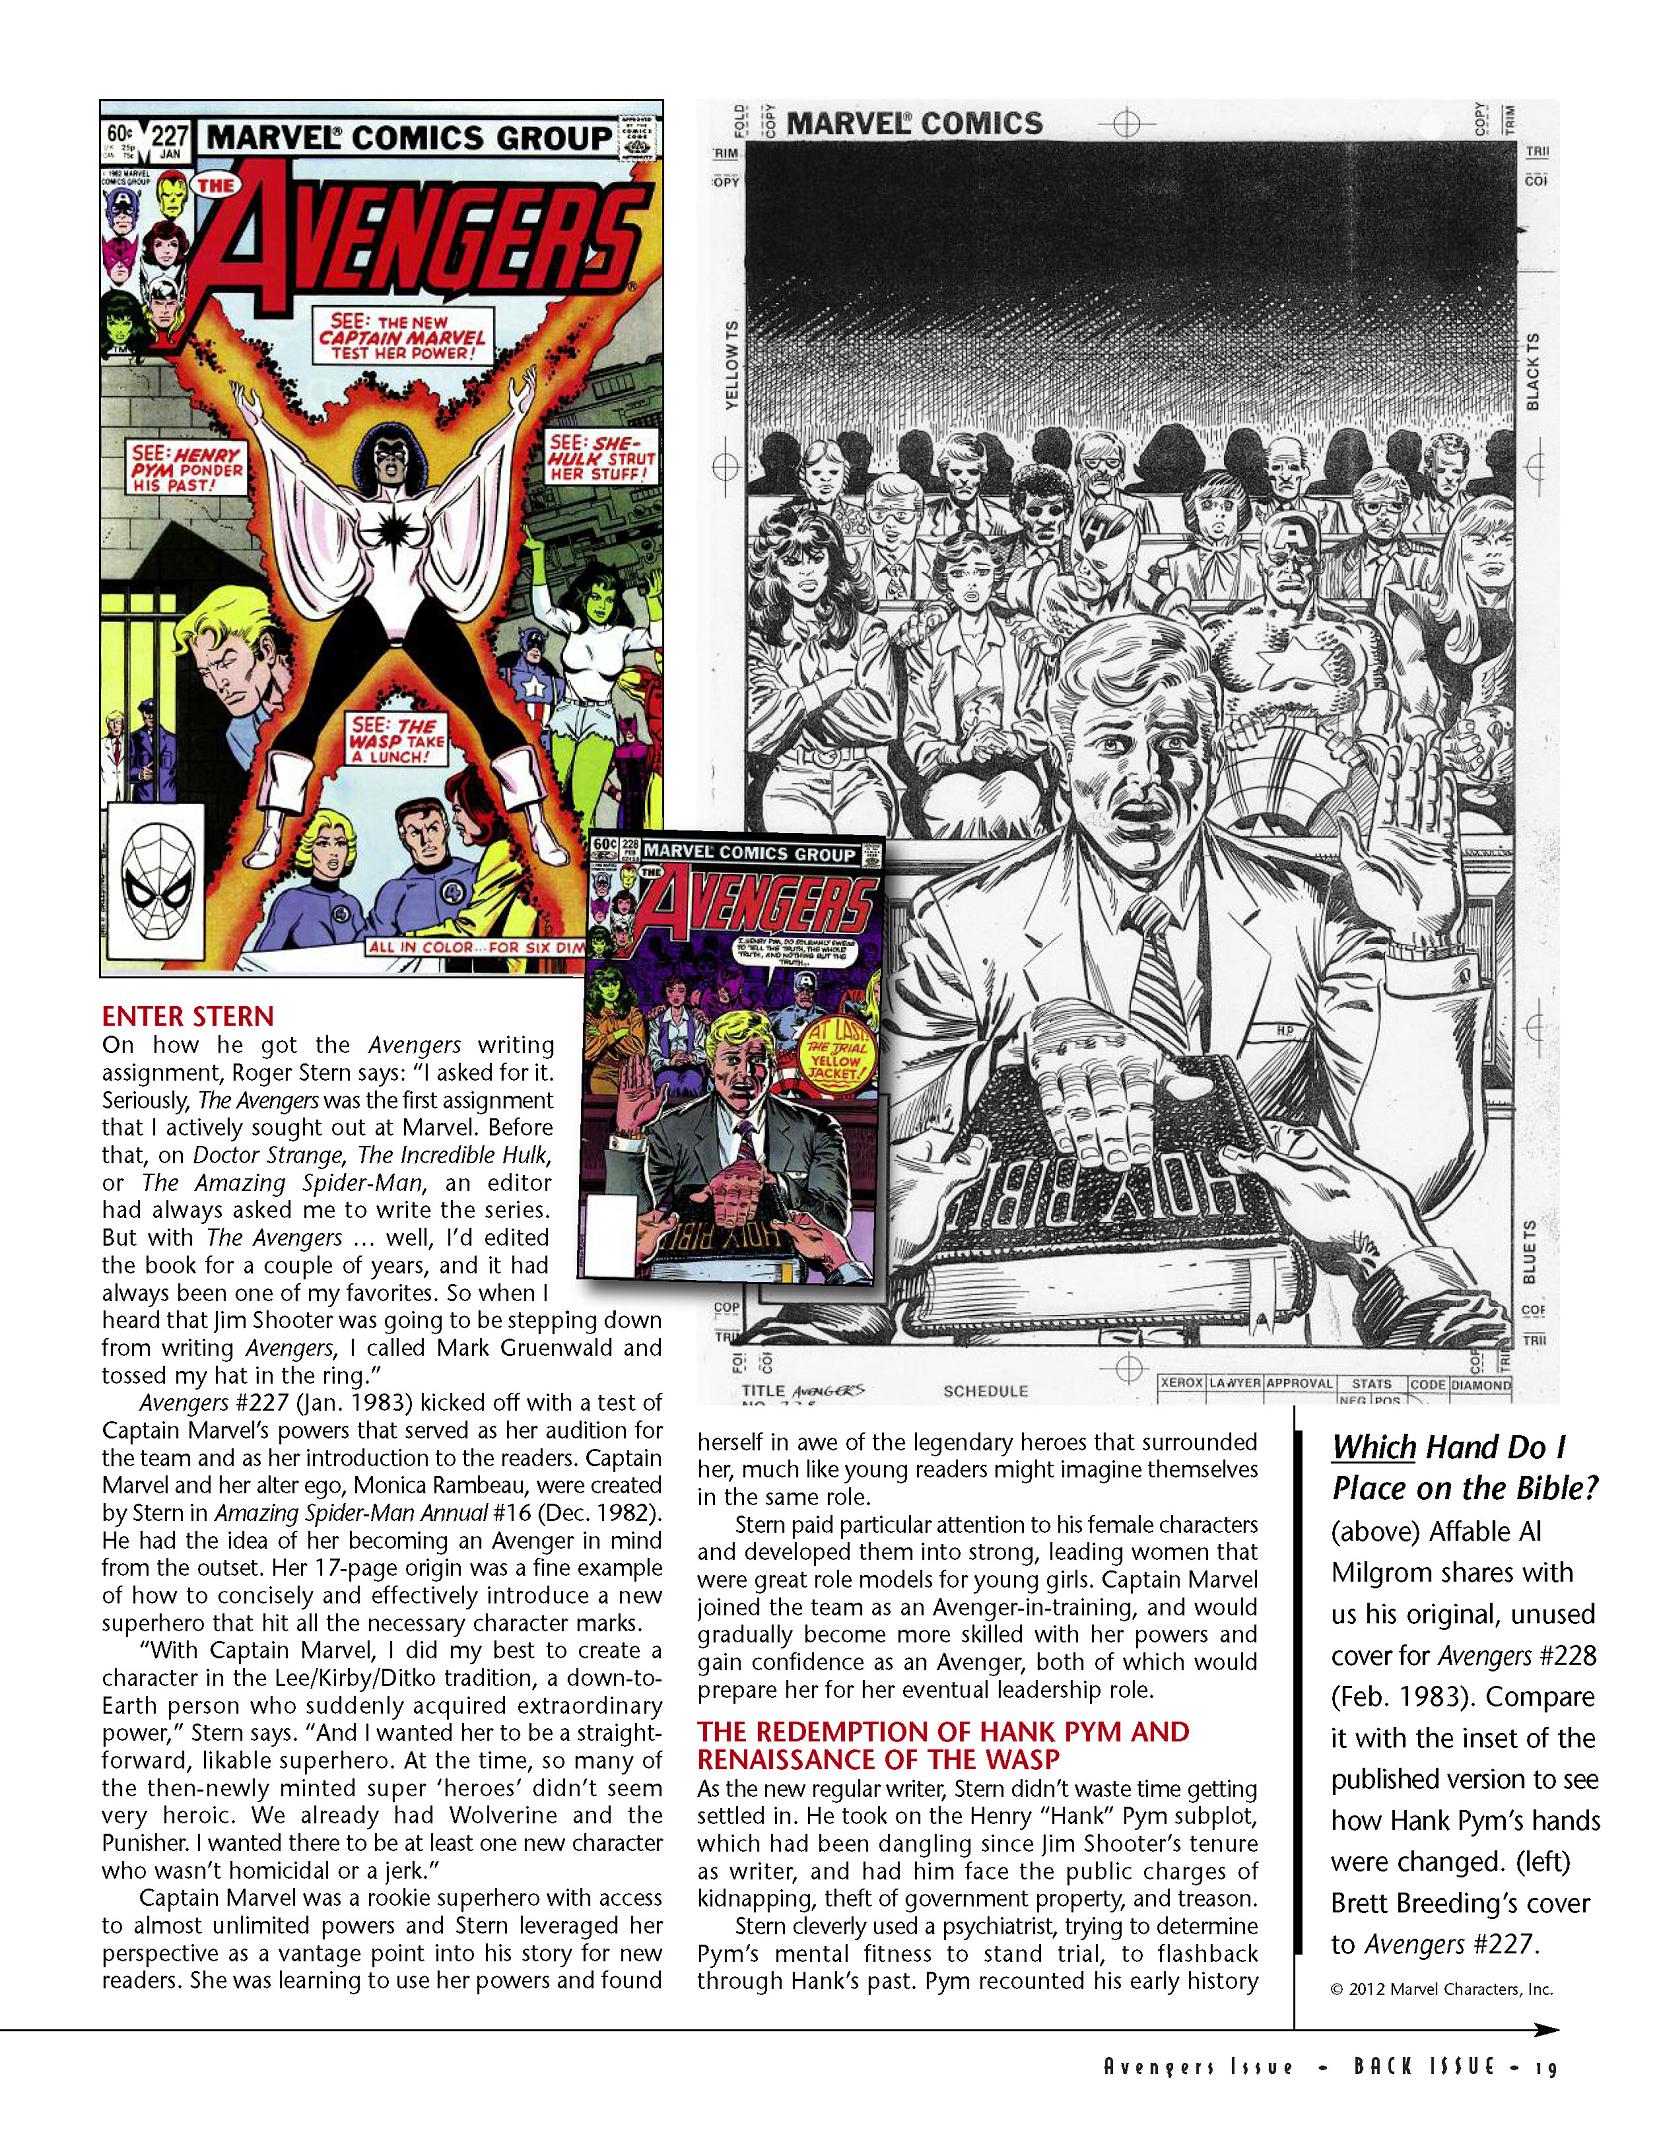 Read online Back Issue comic -  Issue #56 - 20